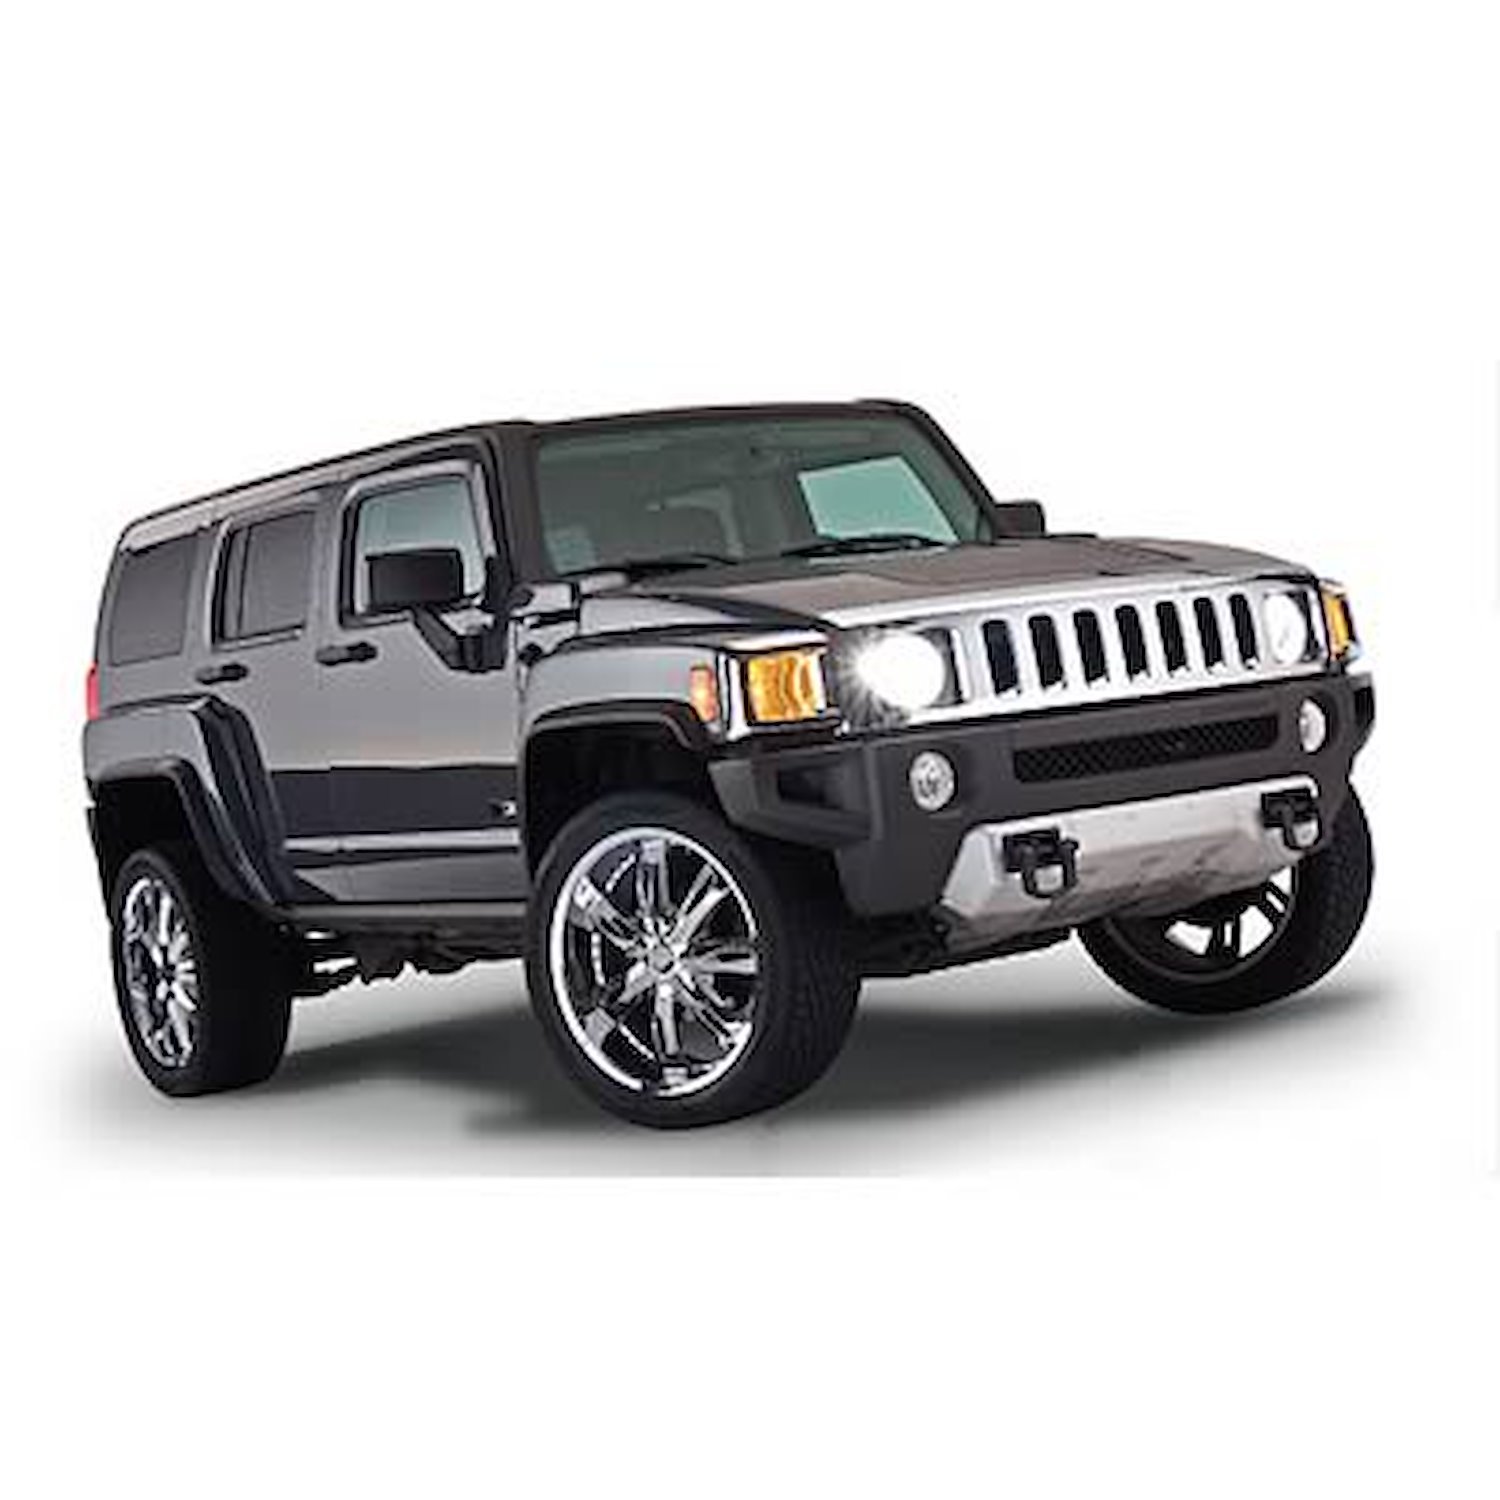 OE-Style Fender Flares 2006-10 Hummer H3